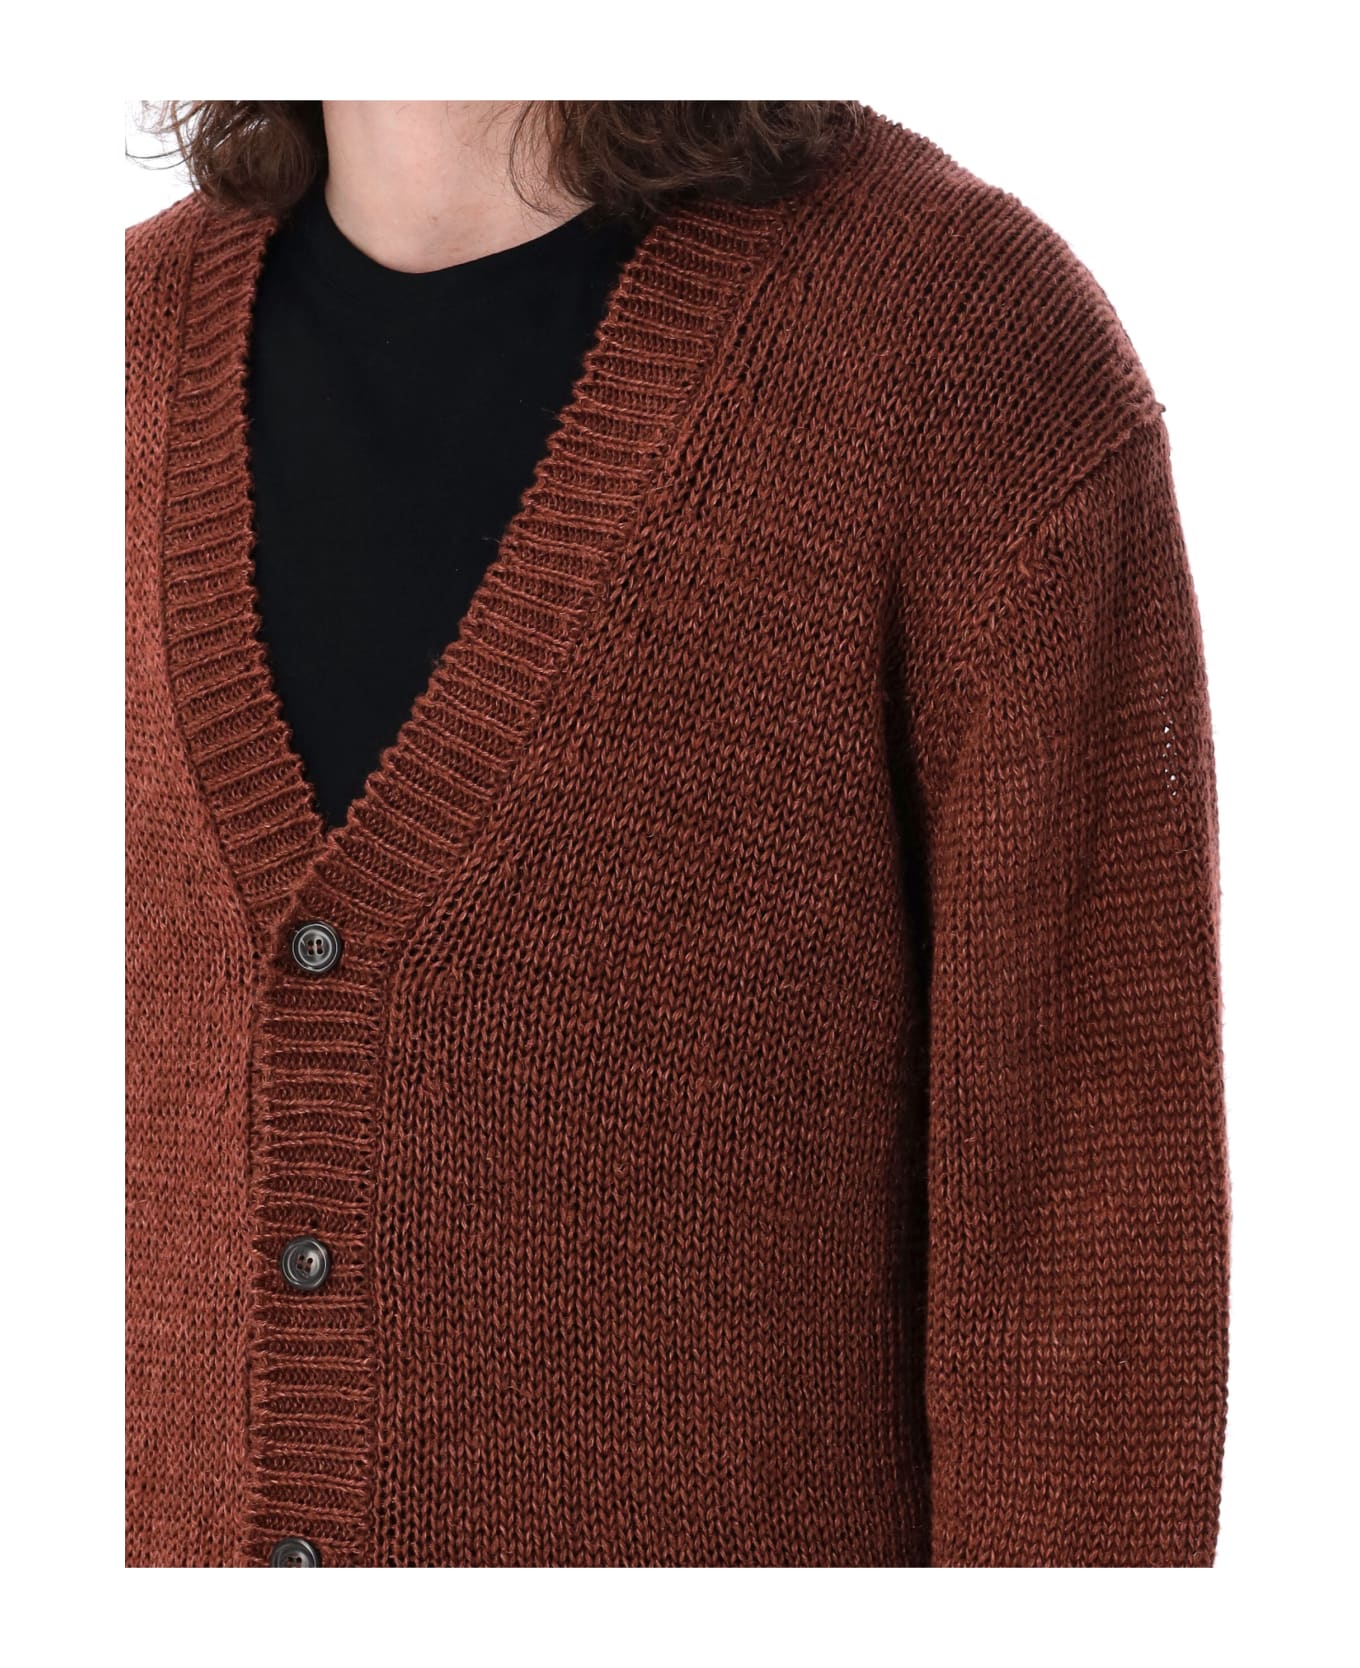 Our Legacy Academy Cardigan - BROWN カーディガン